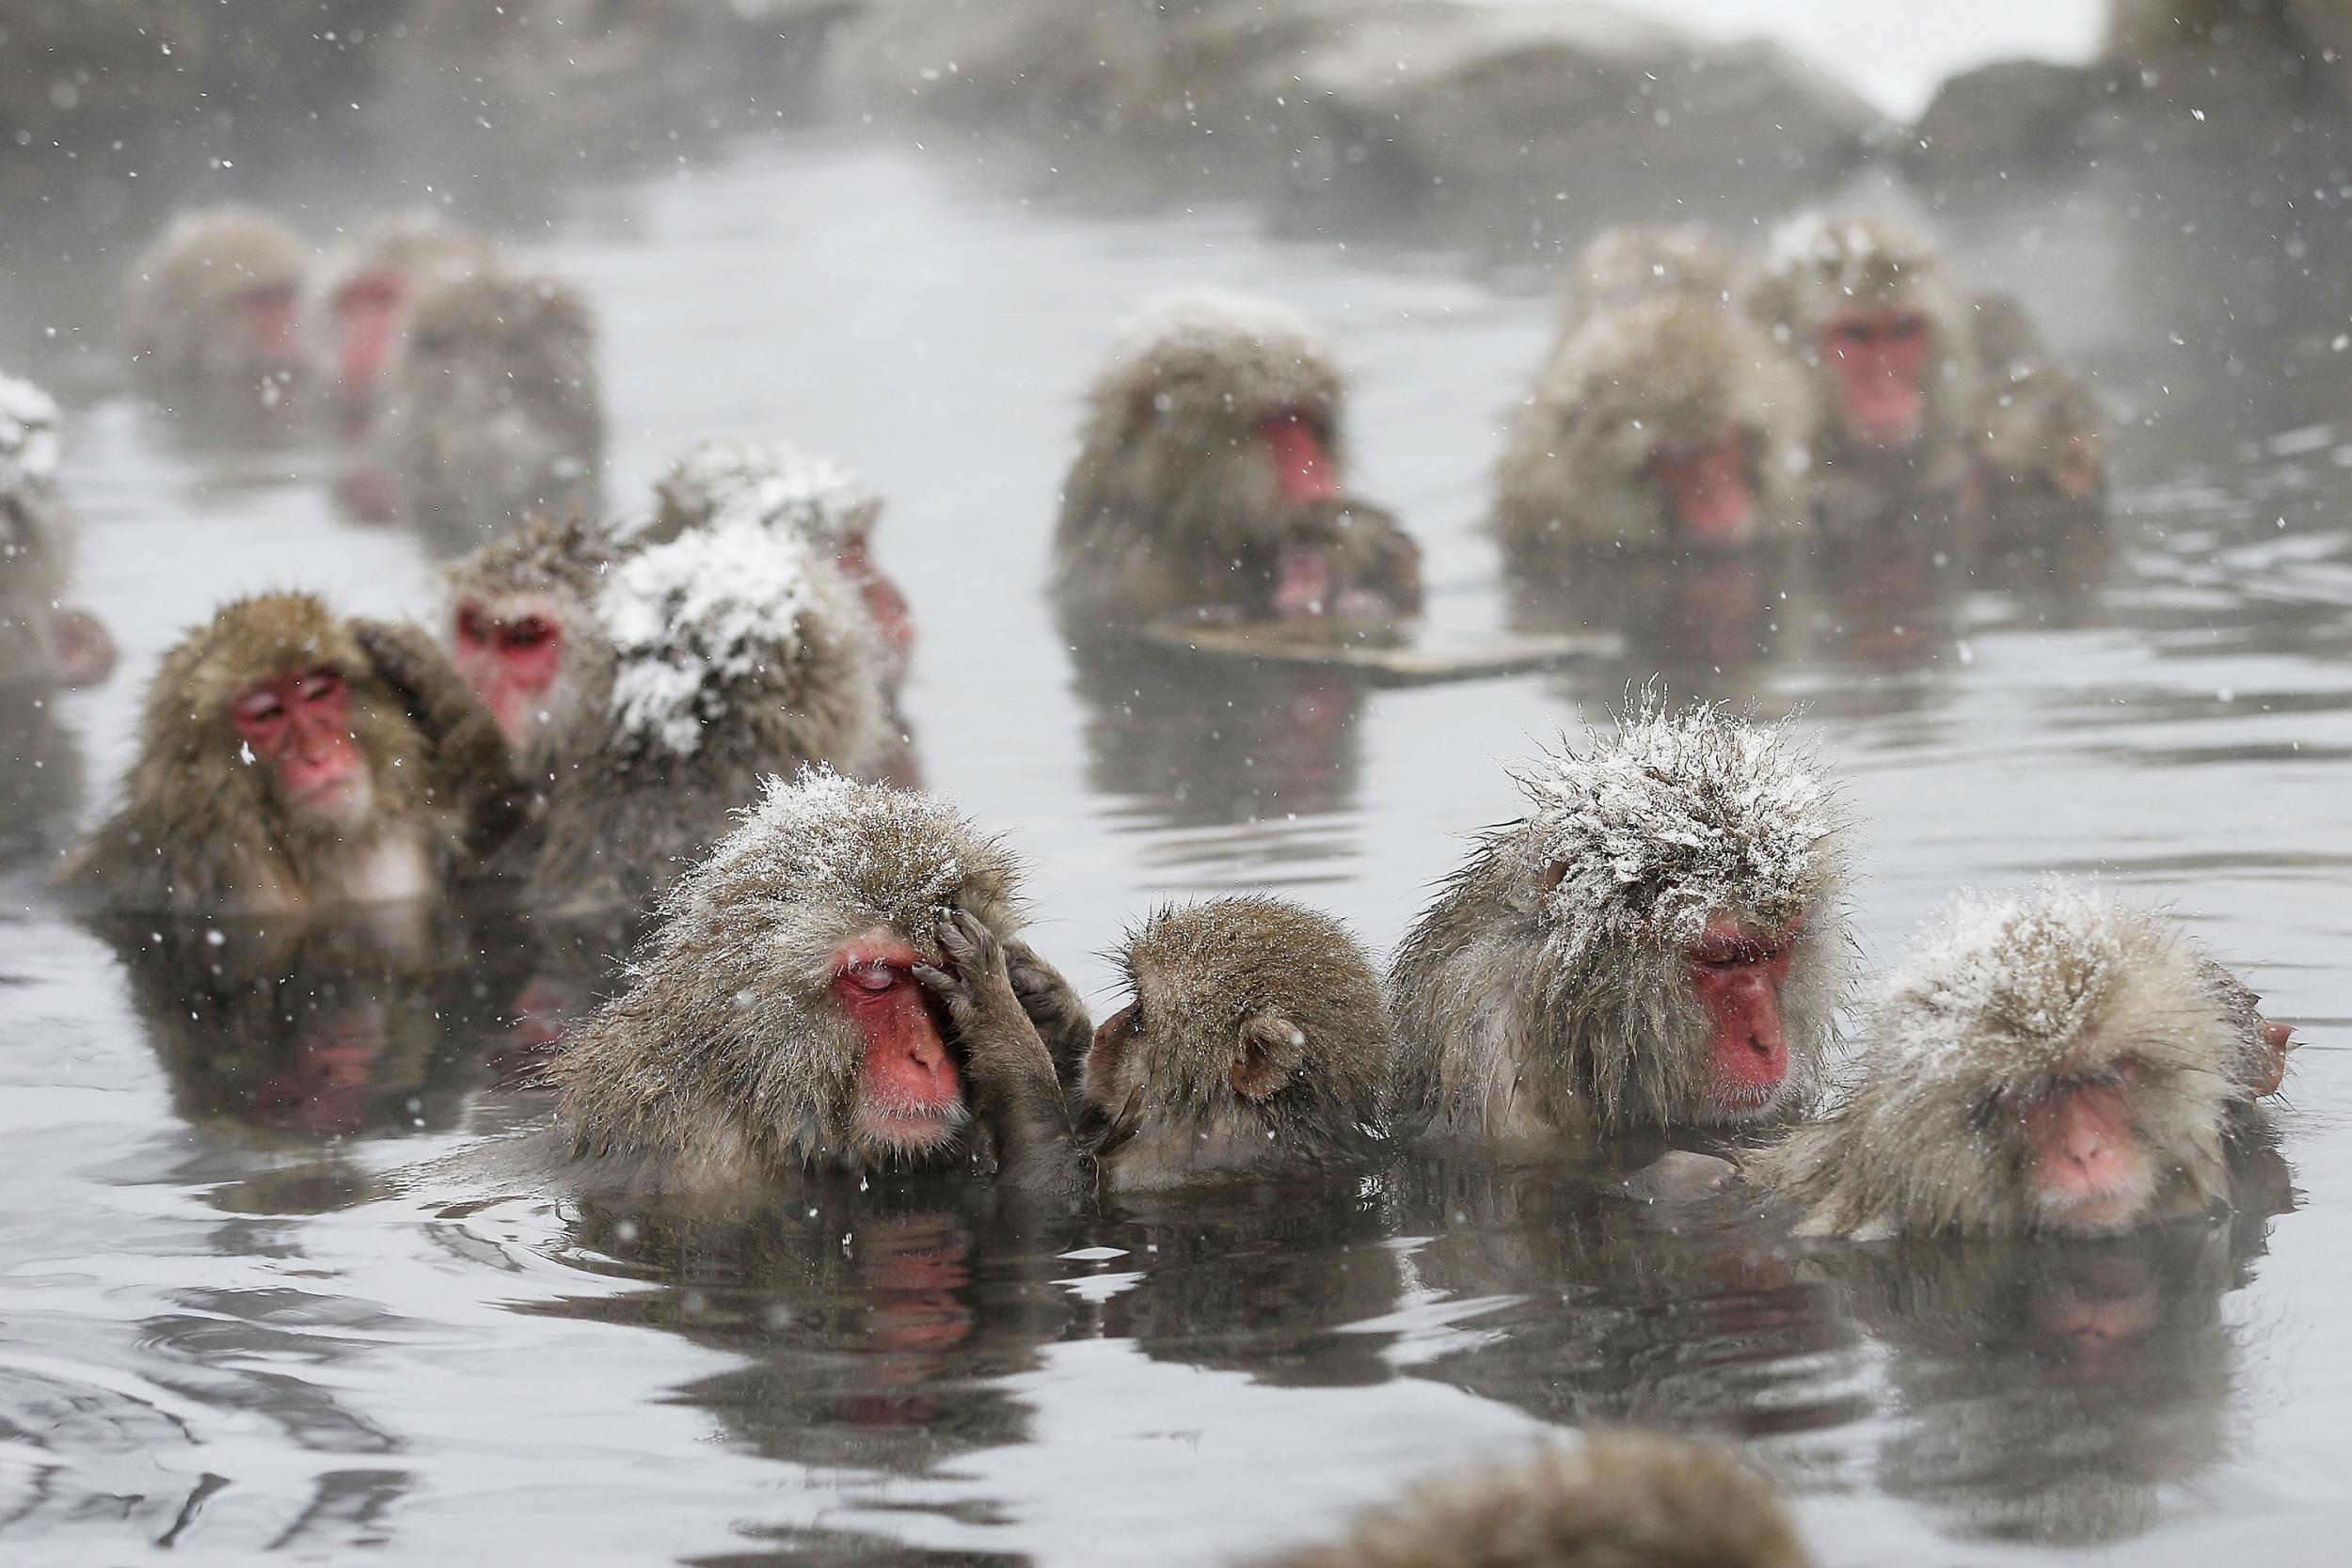 Macaques bathe high in the mountains of Japan’s Nagano prefecture